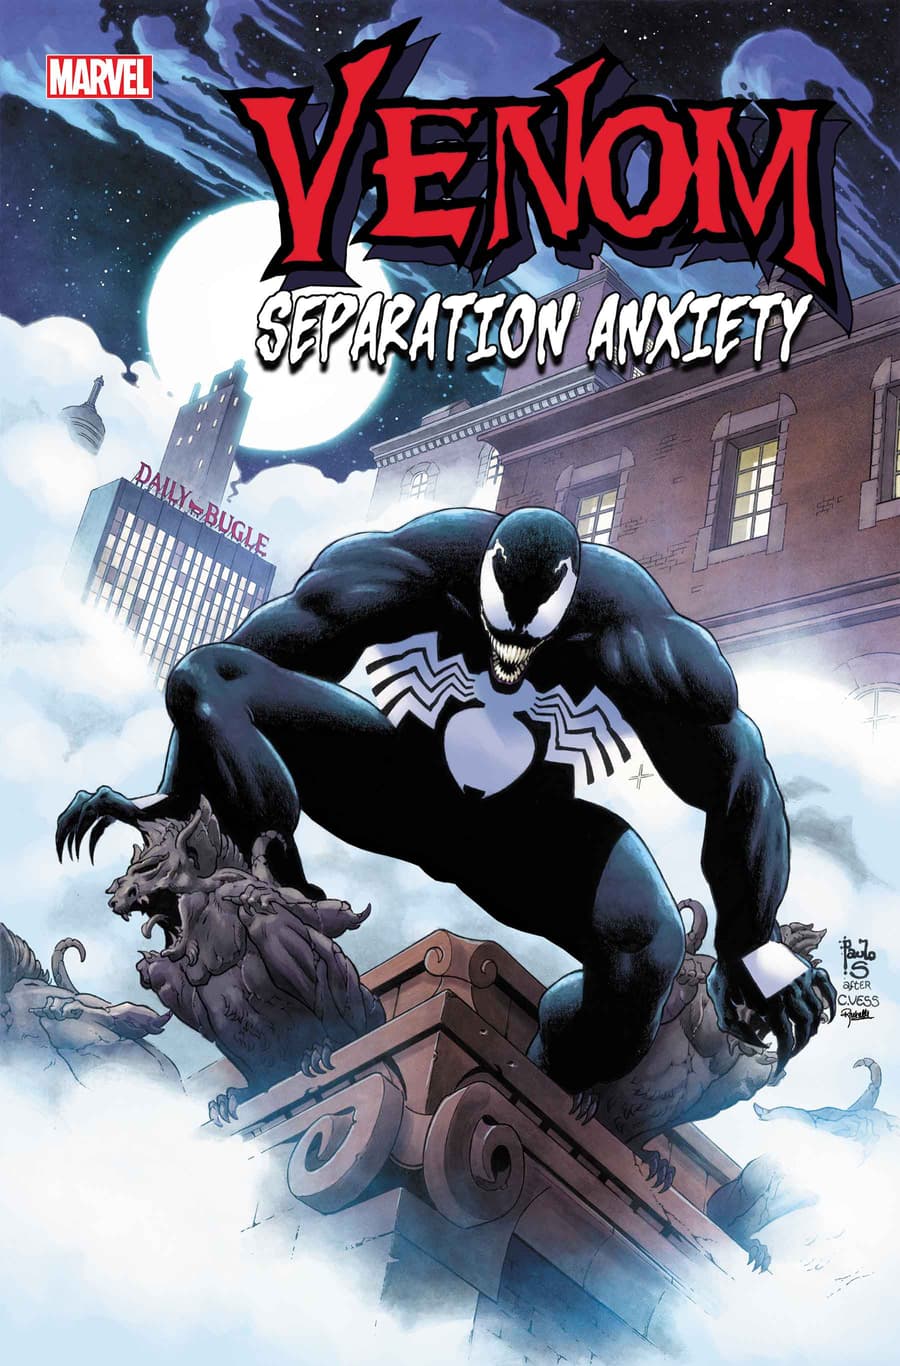 VENOM: SEPARATION ANXIETY #1 cover by Paulo Siqueira